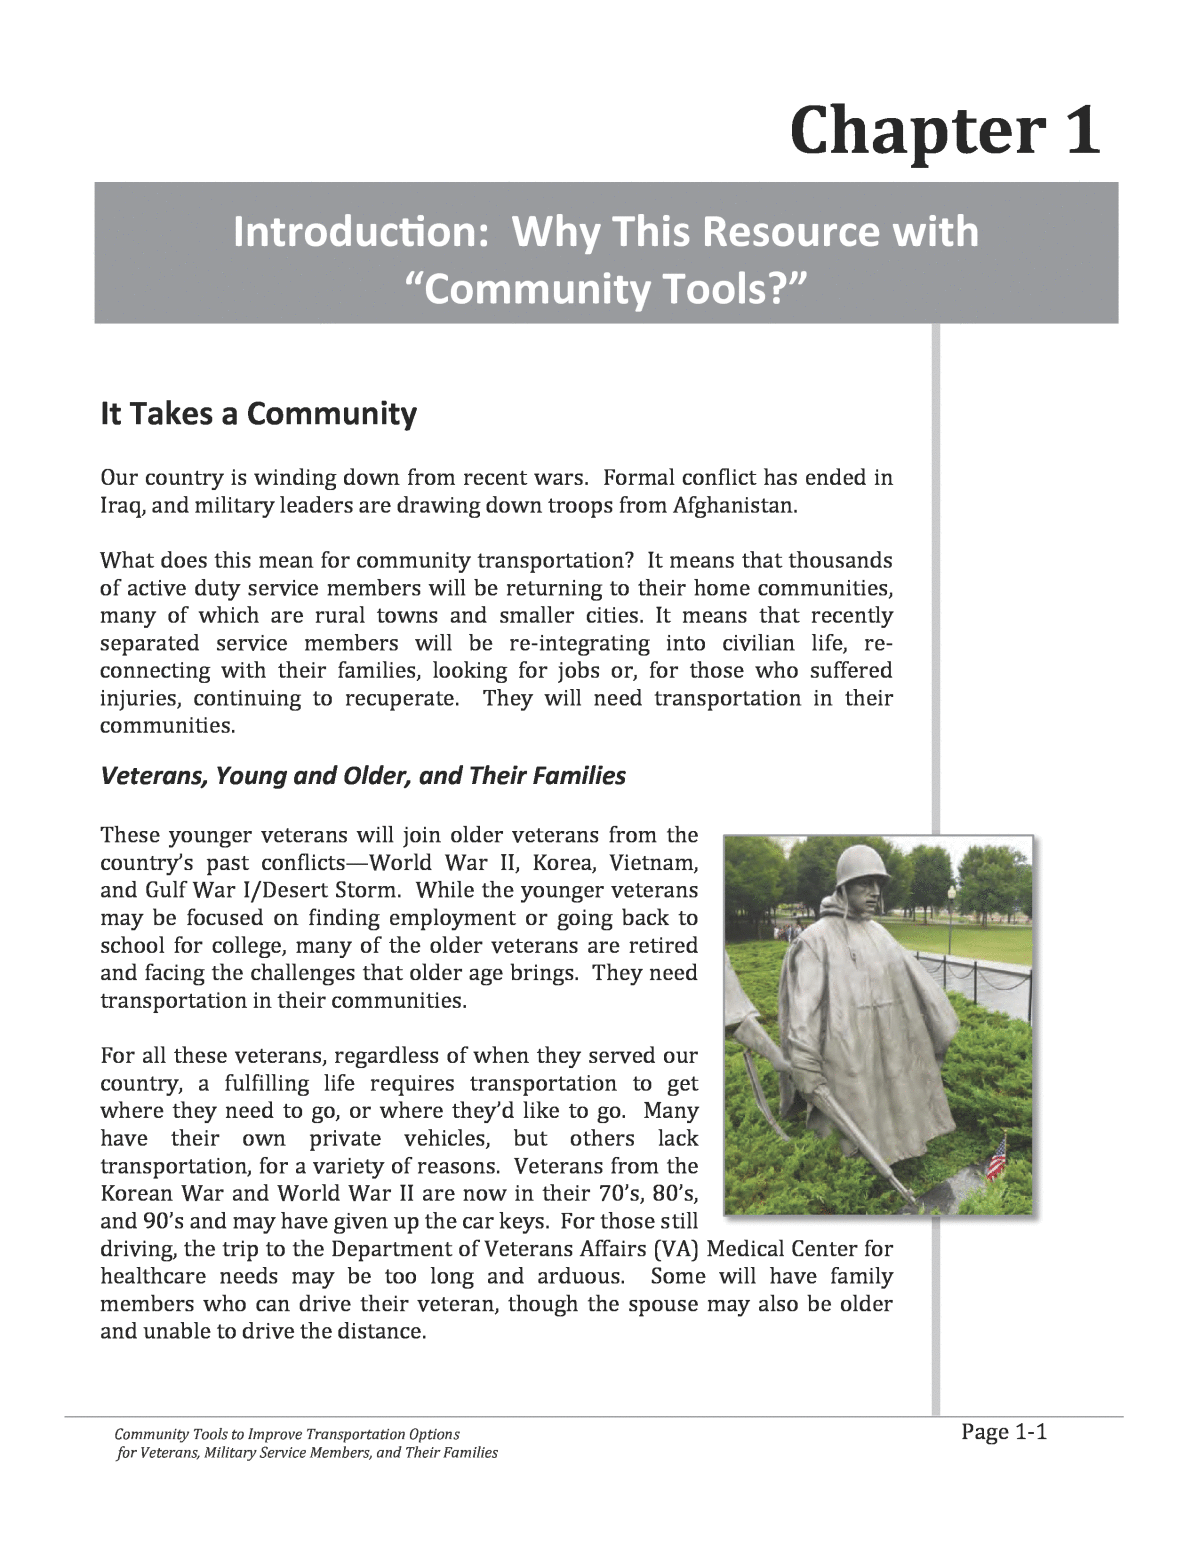 Chapter 1 - Introduction: Why This Resource with Community Tools?, Community Tools to Improve Transportation Options for Veterans, Military  Service Members, and Their Families